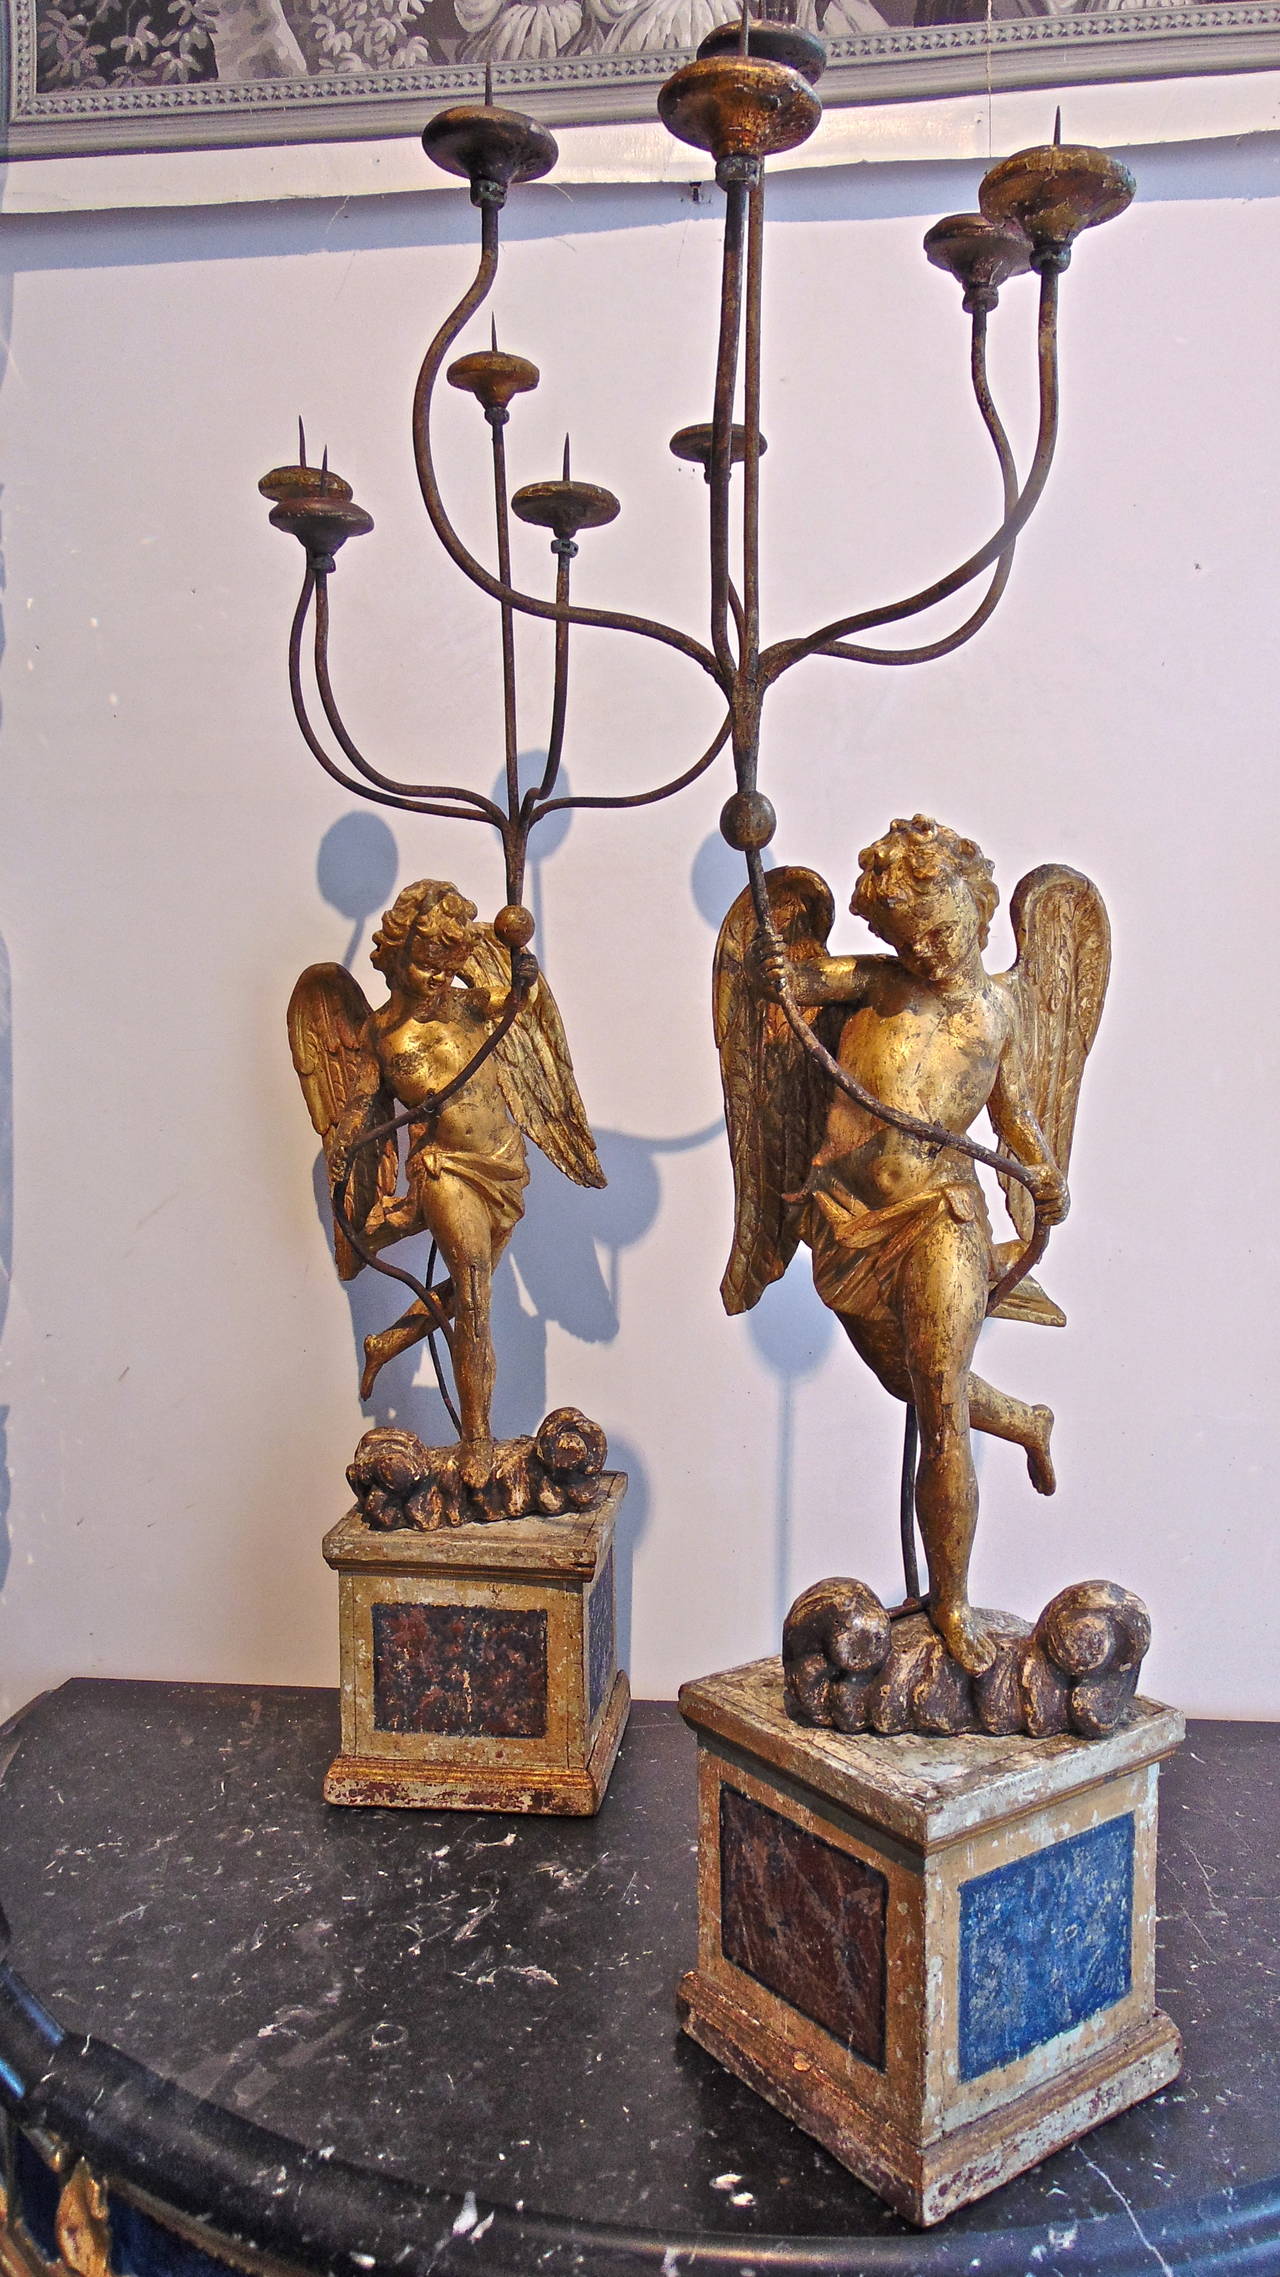 Period Italian Baroque carved and parcel gilt candelabra.

--Gilt and faux marble wooden candelabra.
--Realistic putti or angels holding pricket candle arms.
--Faux lapis and porphyry.